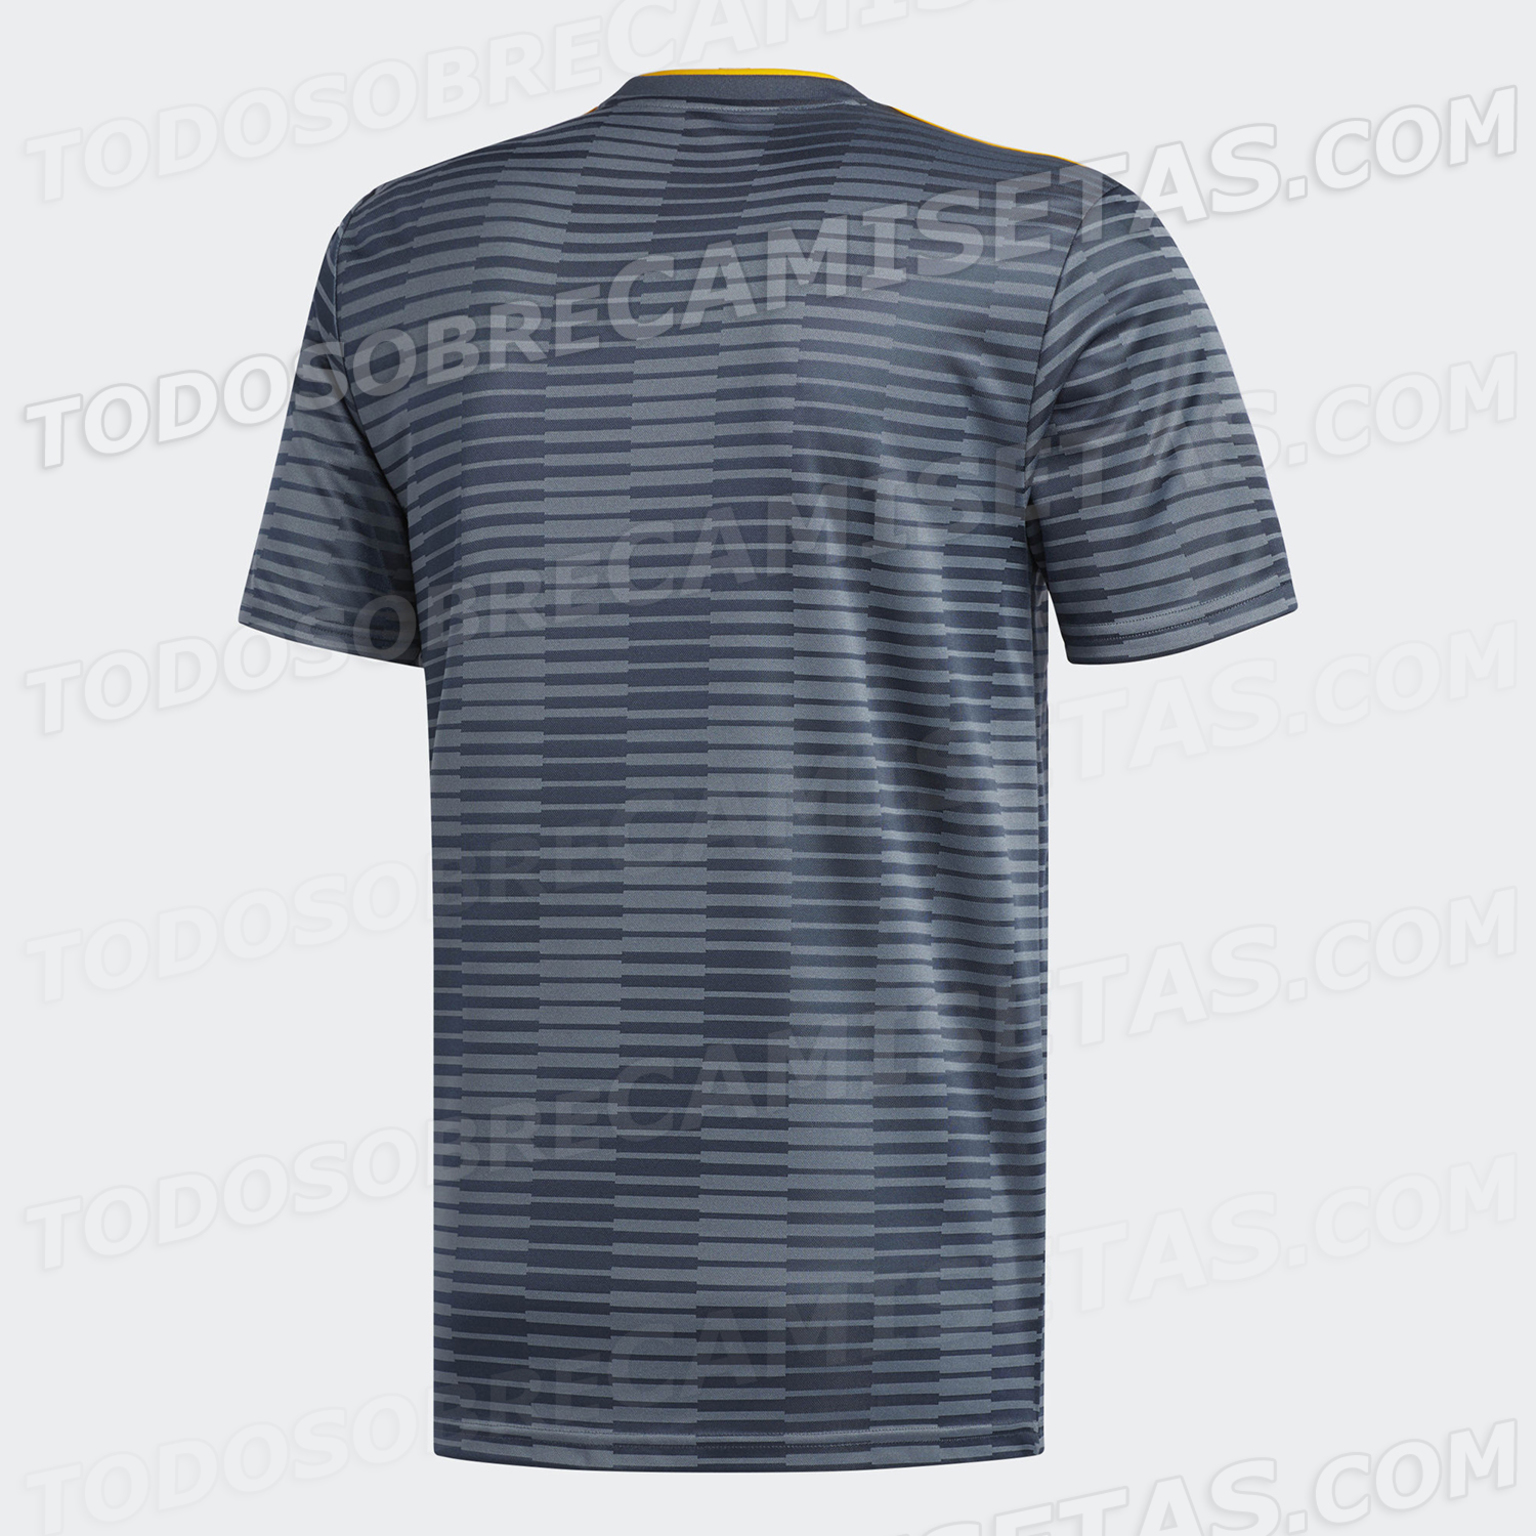 Leicester City adidas Away Kit 2018-19 LEAKED